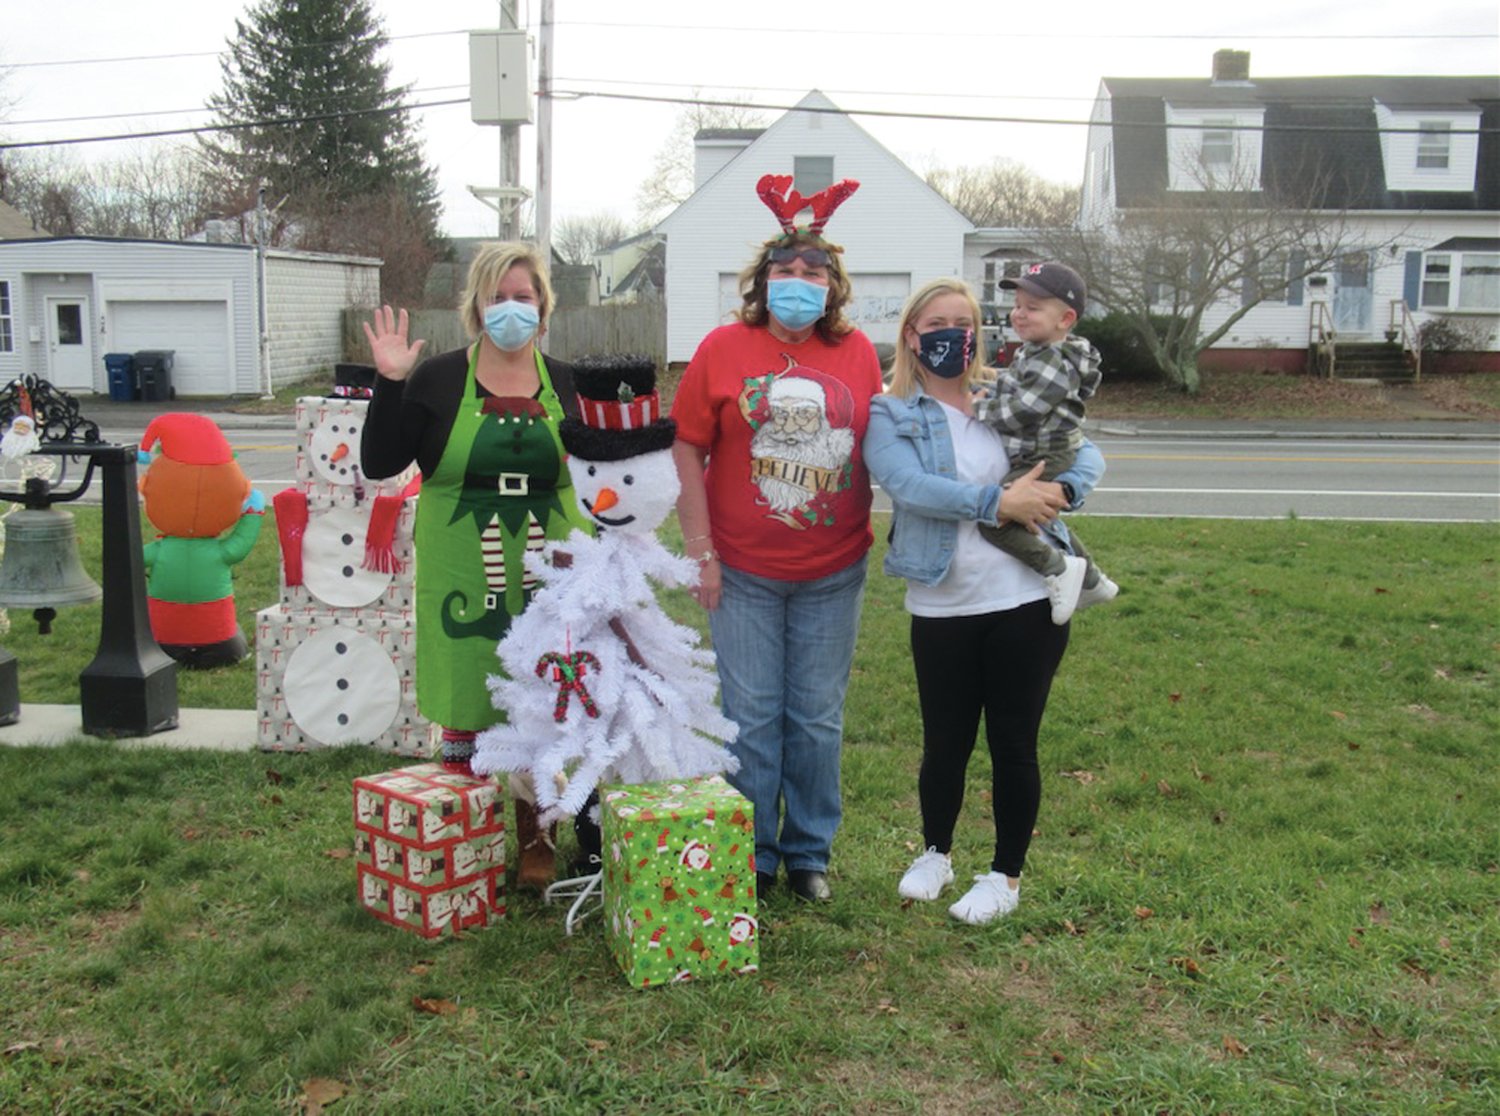 CONNOR’S CORNER: Tri-City Elks members Donna Beauregard, Danielle Grant and Exalted Ruler Deb Mangina are all smiles while making sure children like Connor enjoyed all the decorations and festivities of last weekend’s Drive-By to See Santa Claus in Warwick.